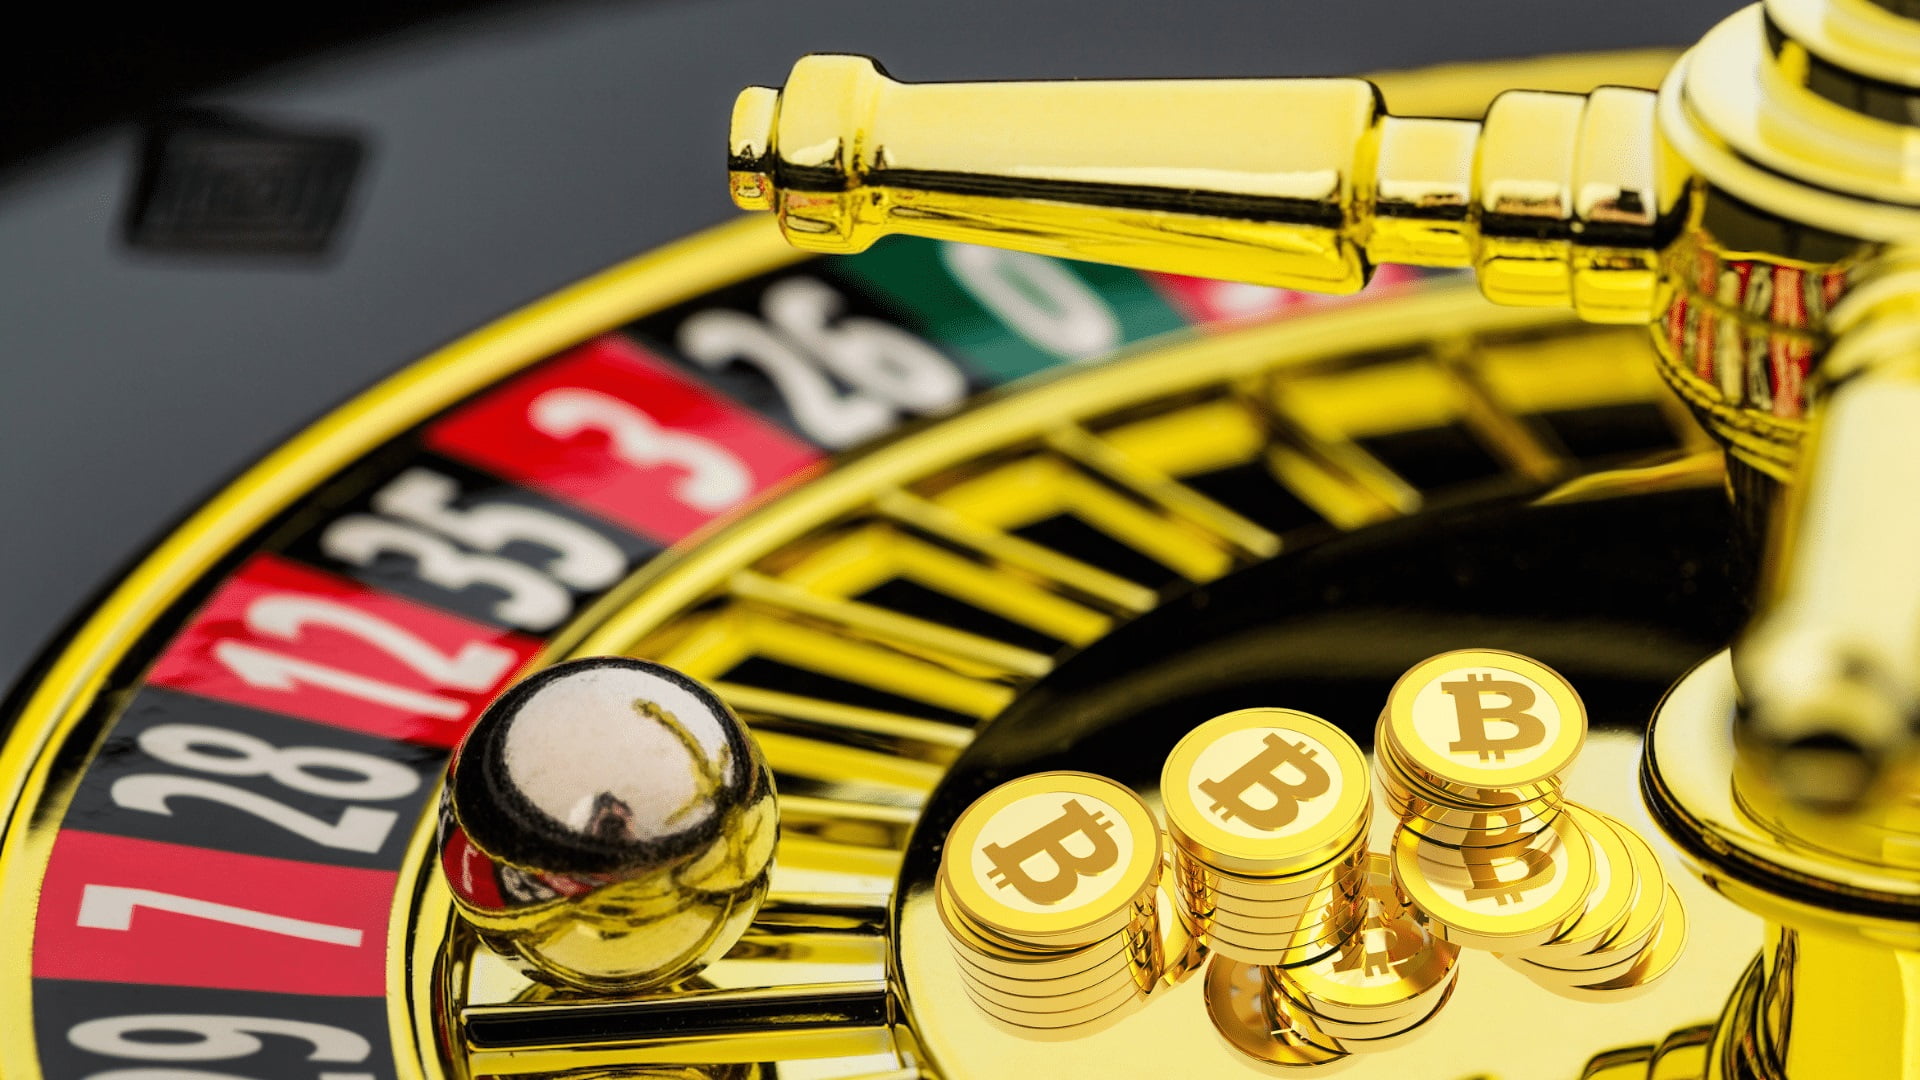 5 Emerging crypto casino Trends To Watch In 2021